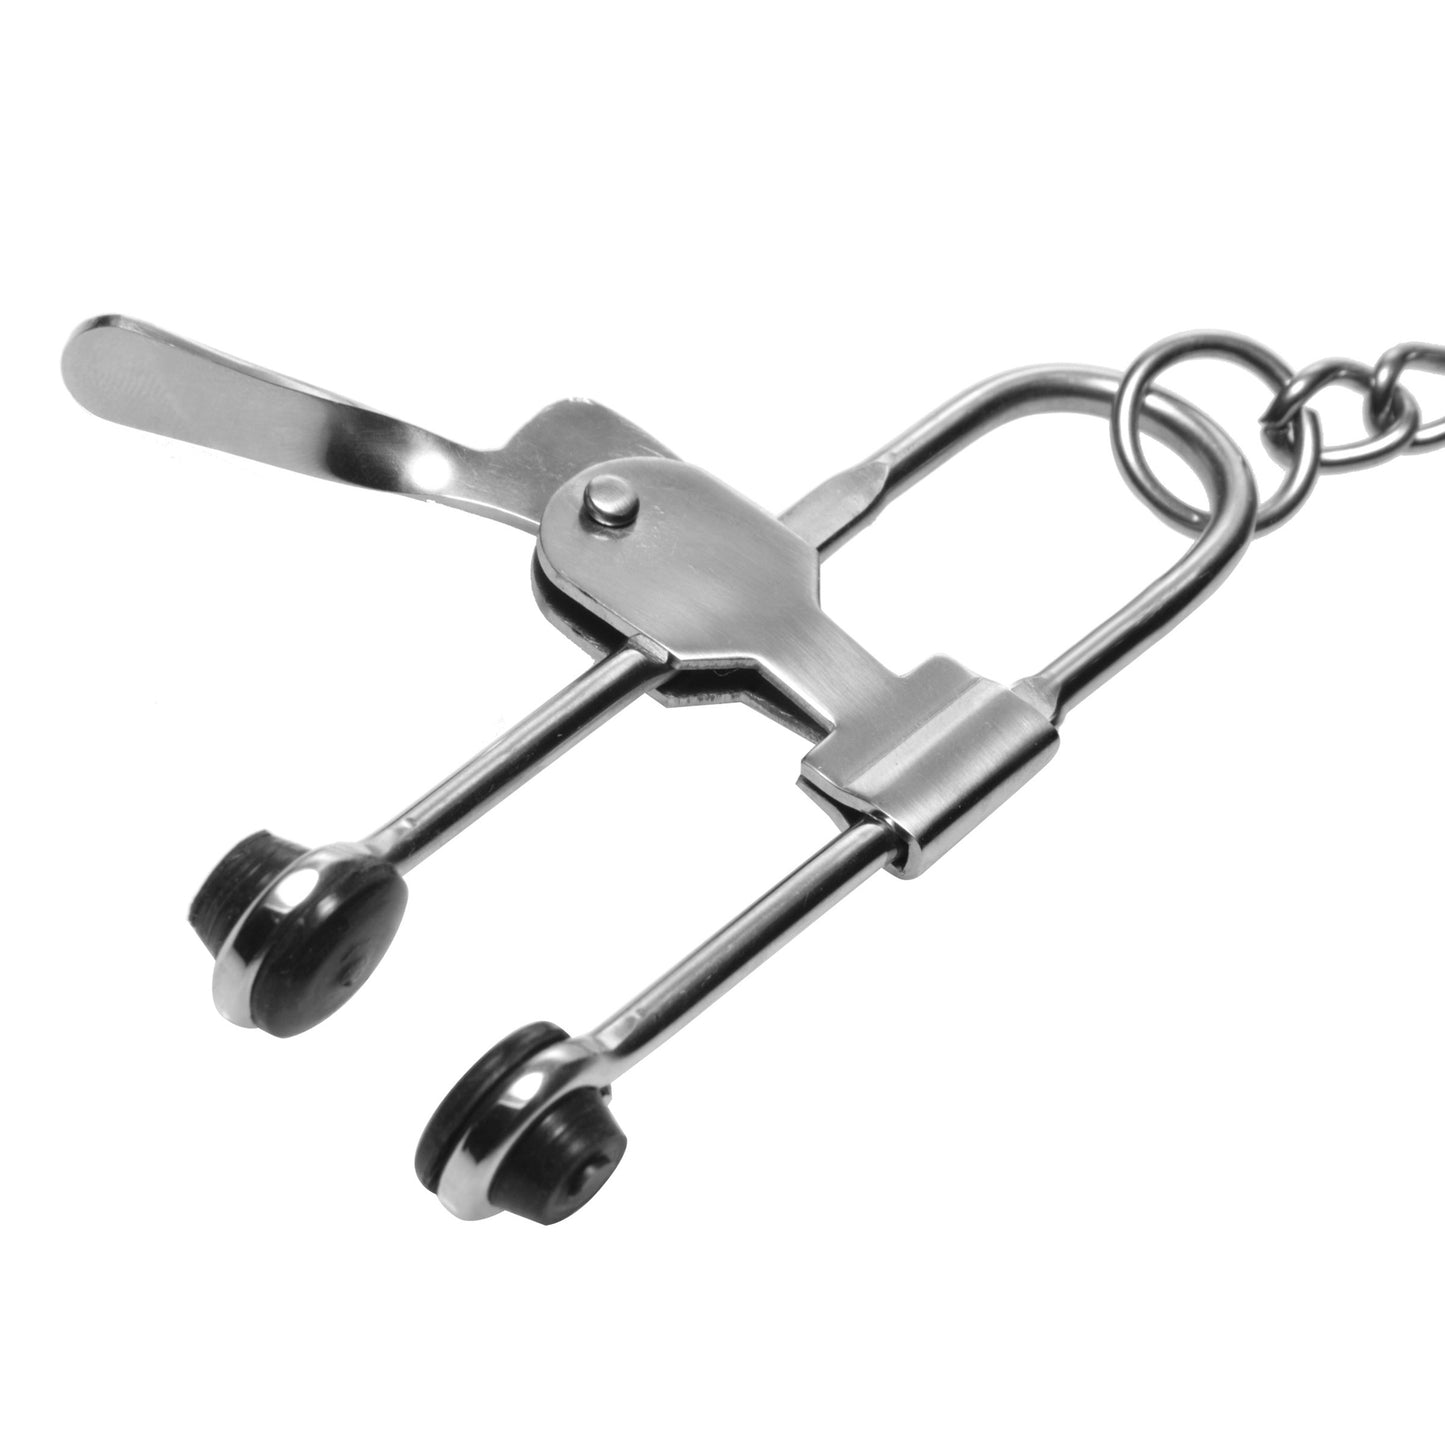 Intensity Nipple Press Clamps with Chain - UABDSM